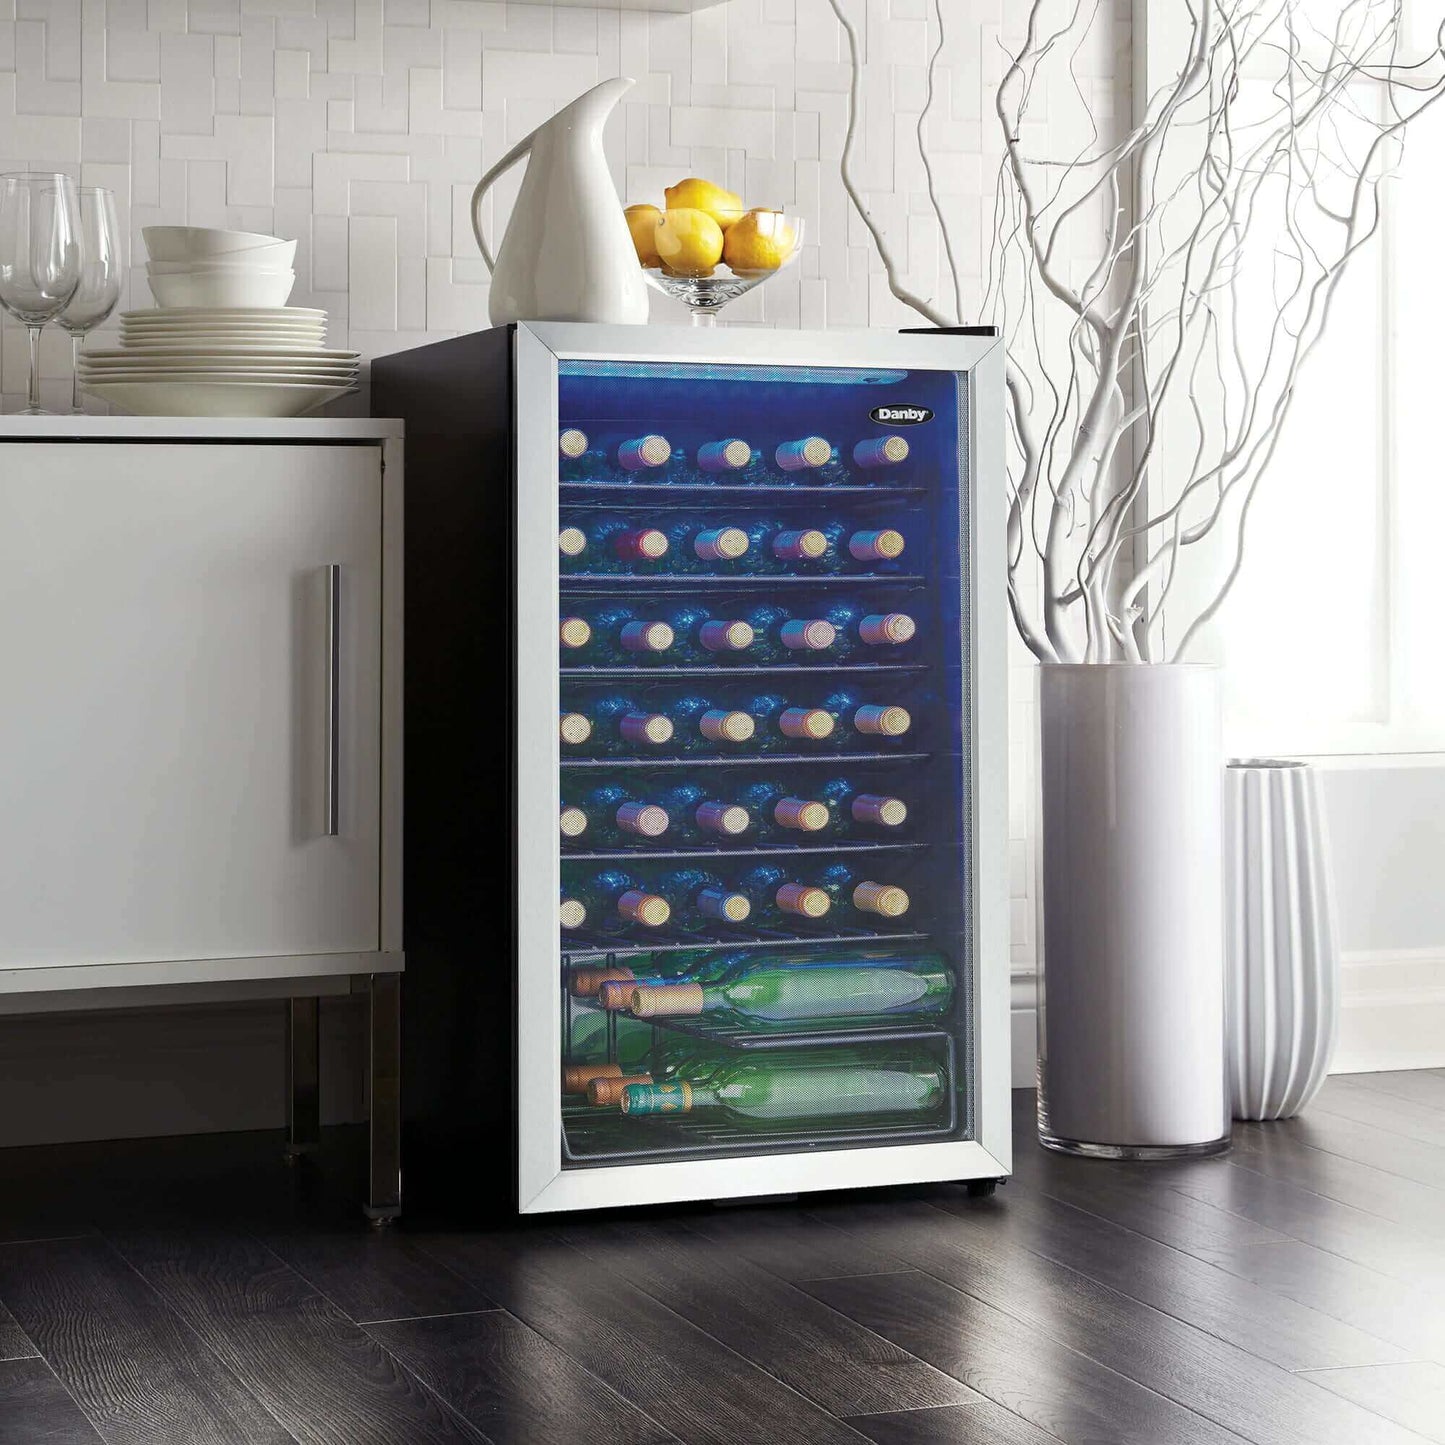 Danby 36 Bottle Free-Standing Wine Cooler in Stainless Steel